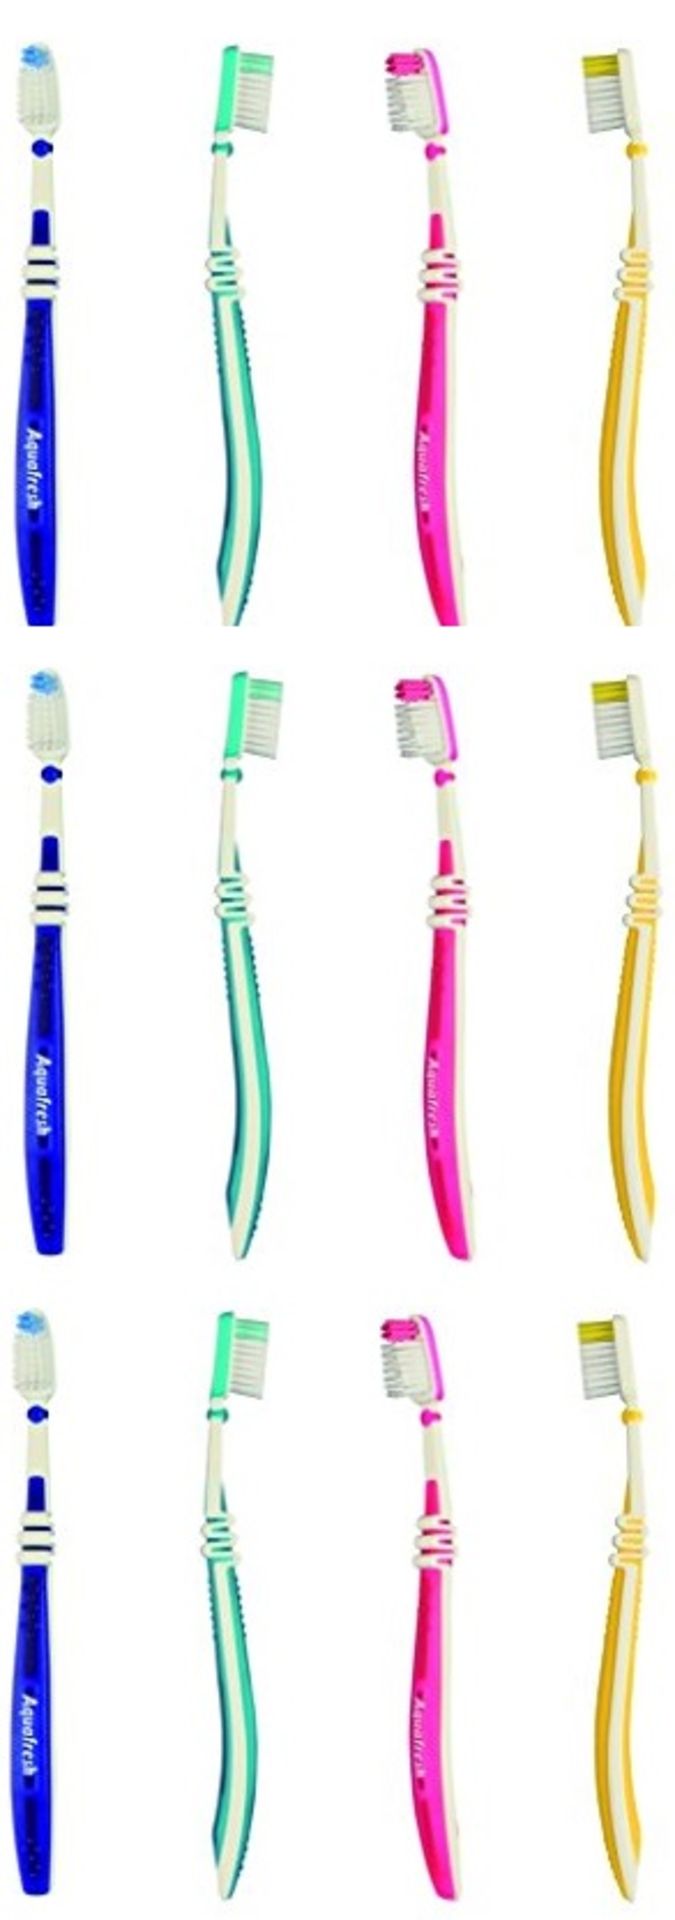 + VAT Brand New 12 x Aquafresh Activate Triple Protection Toothbrush Firm Clean - Image 2 of 3